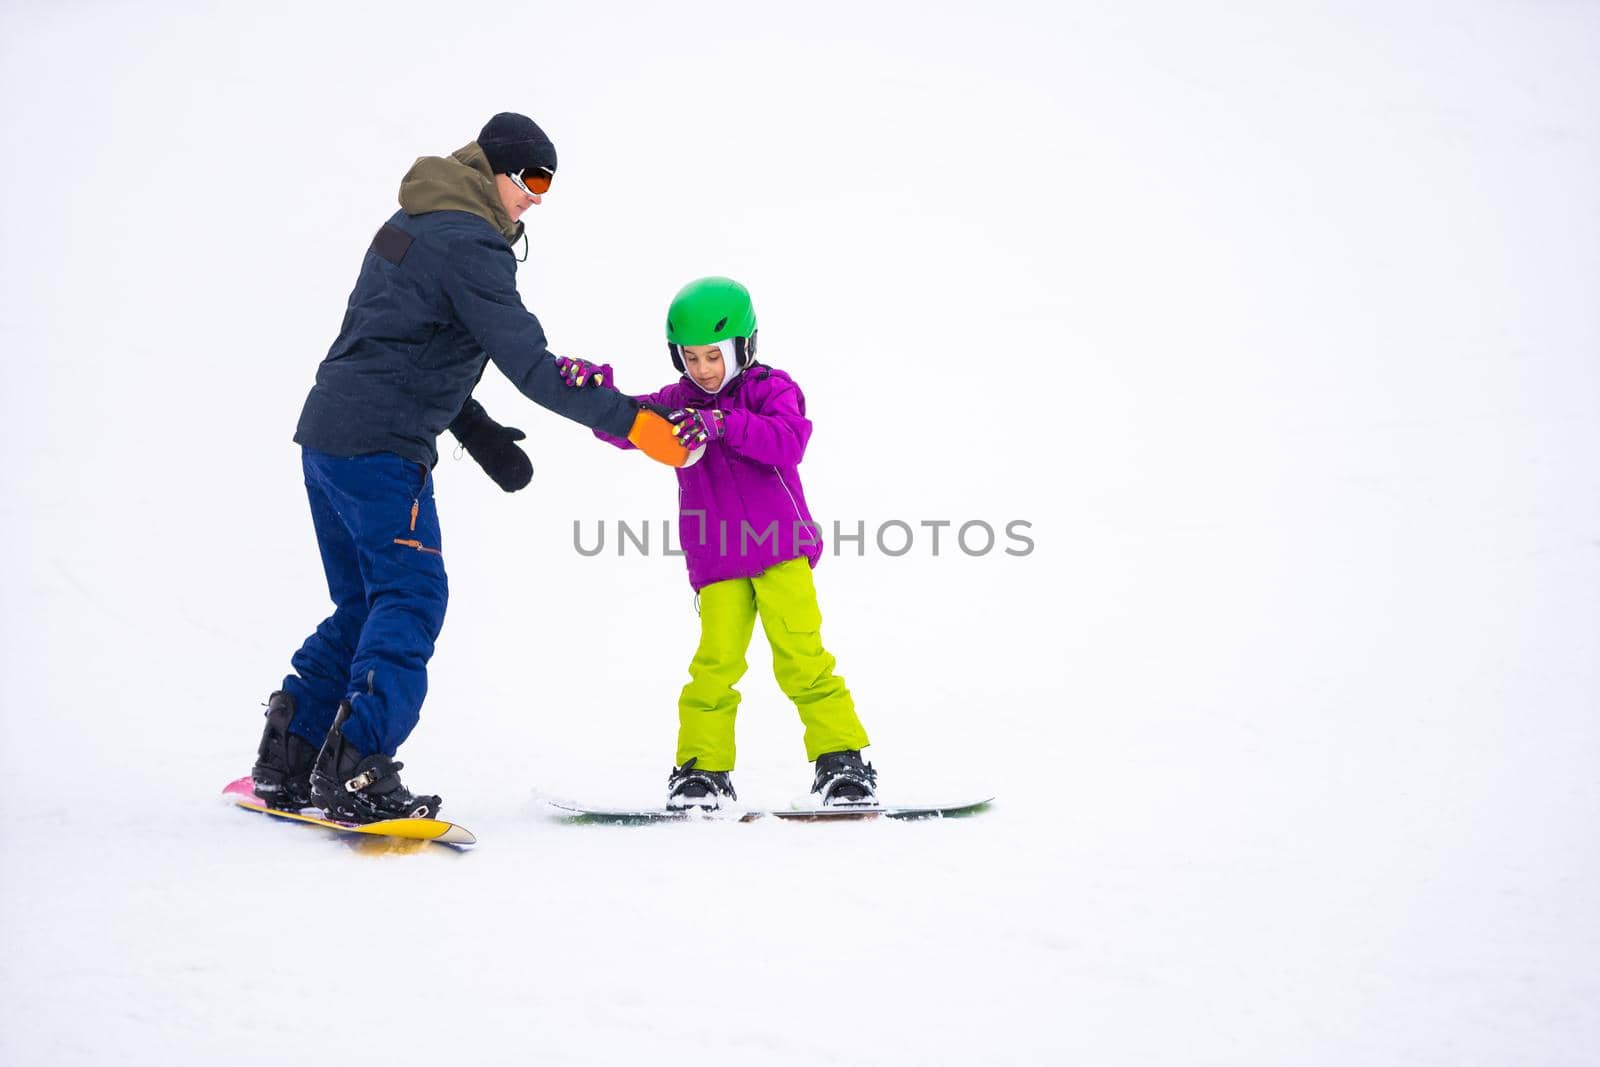 Instructors teach a child on a snow slope to snowboard by Andelov13